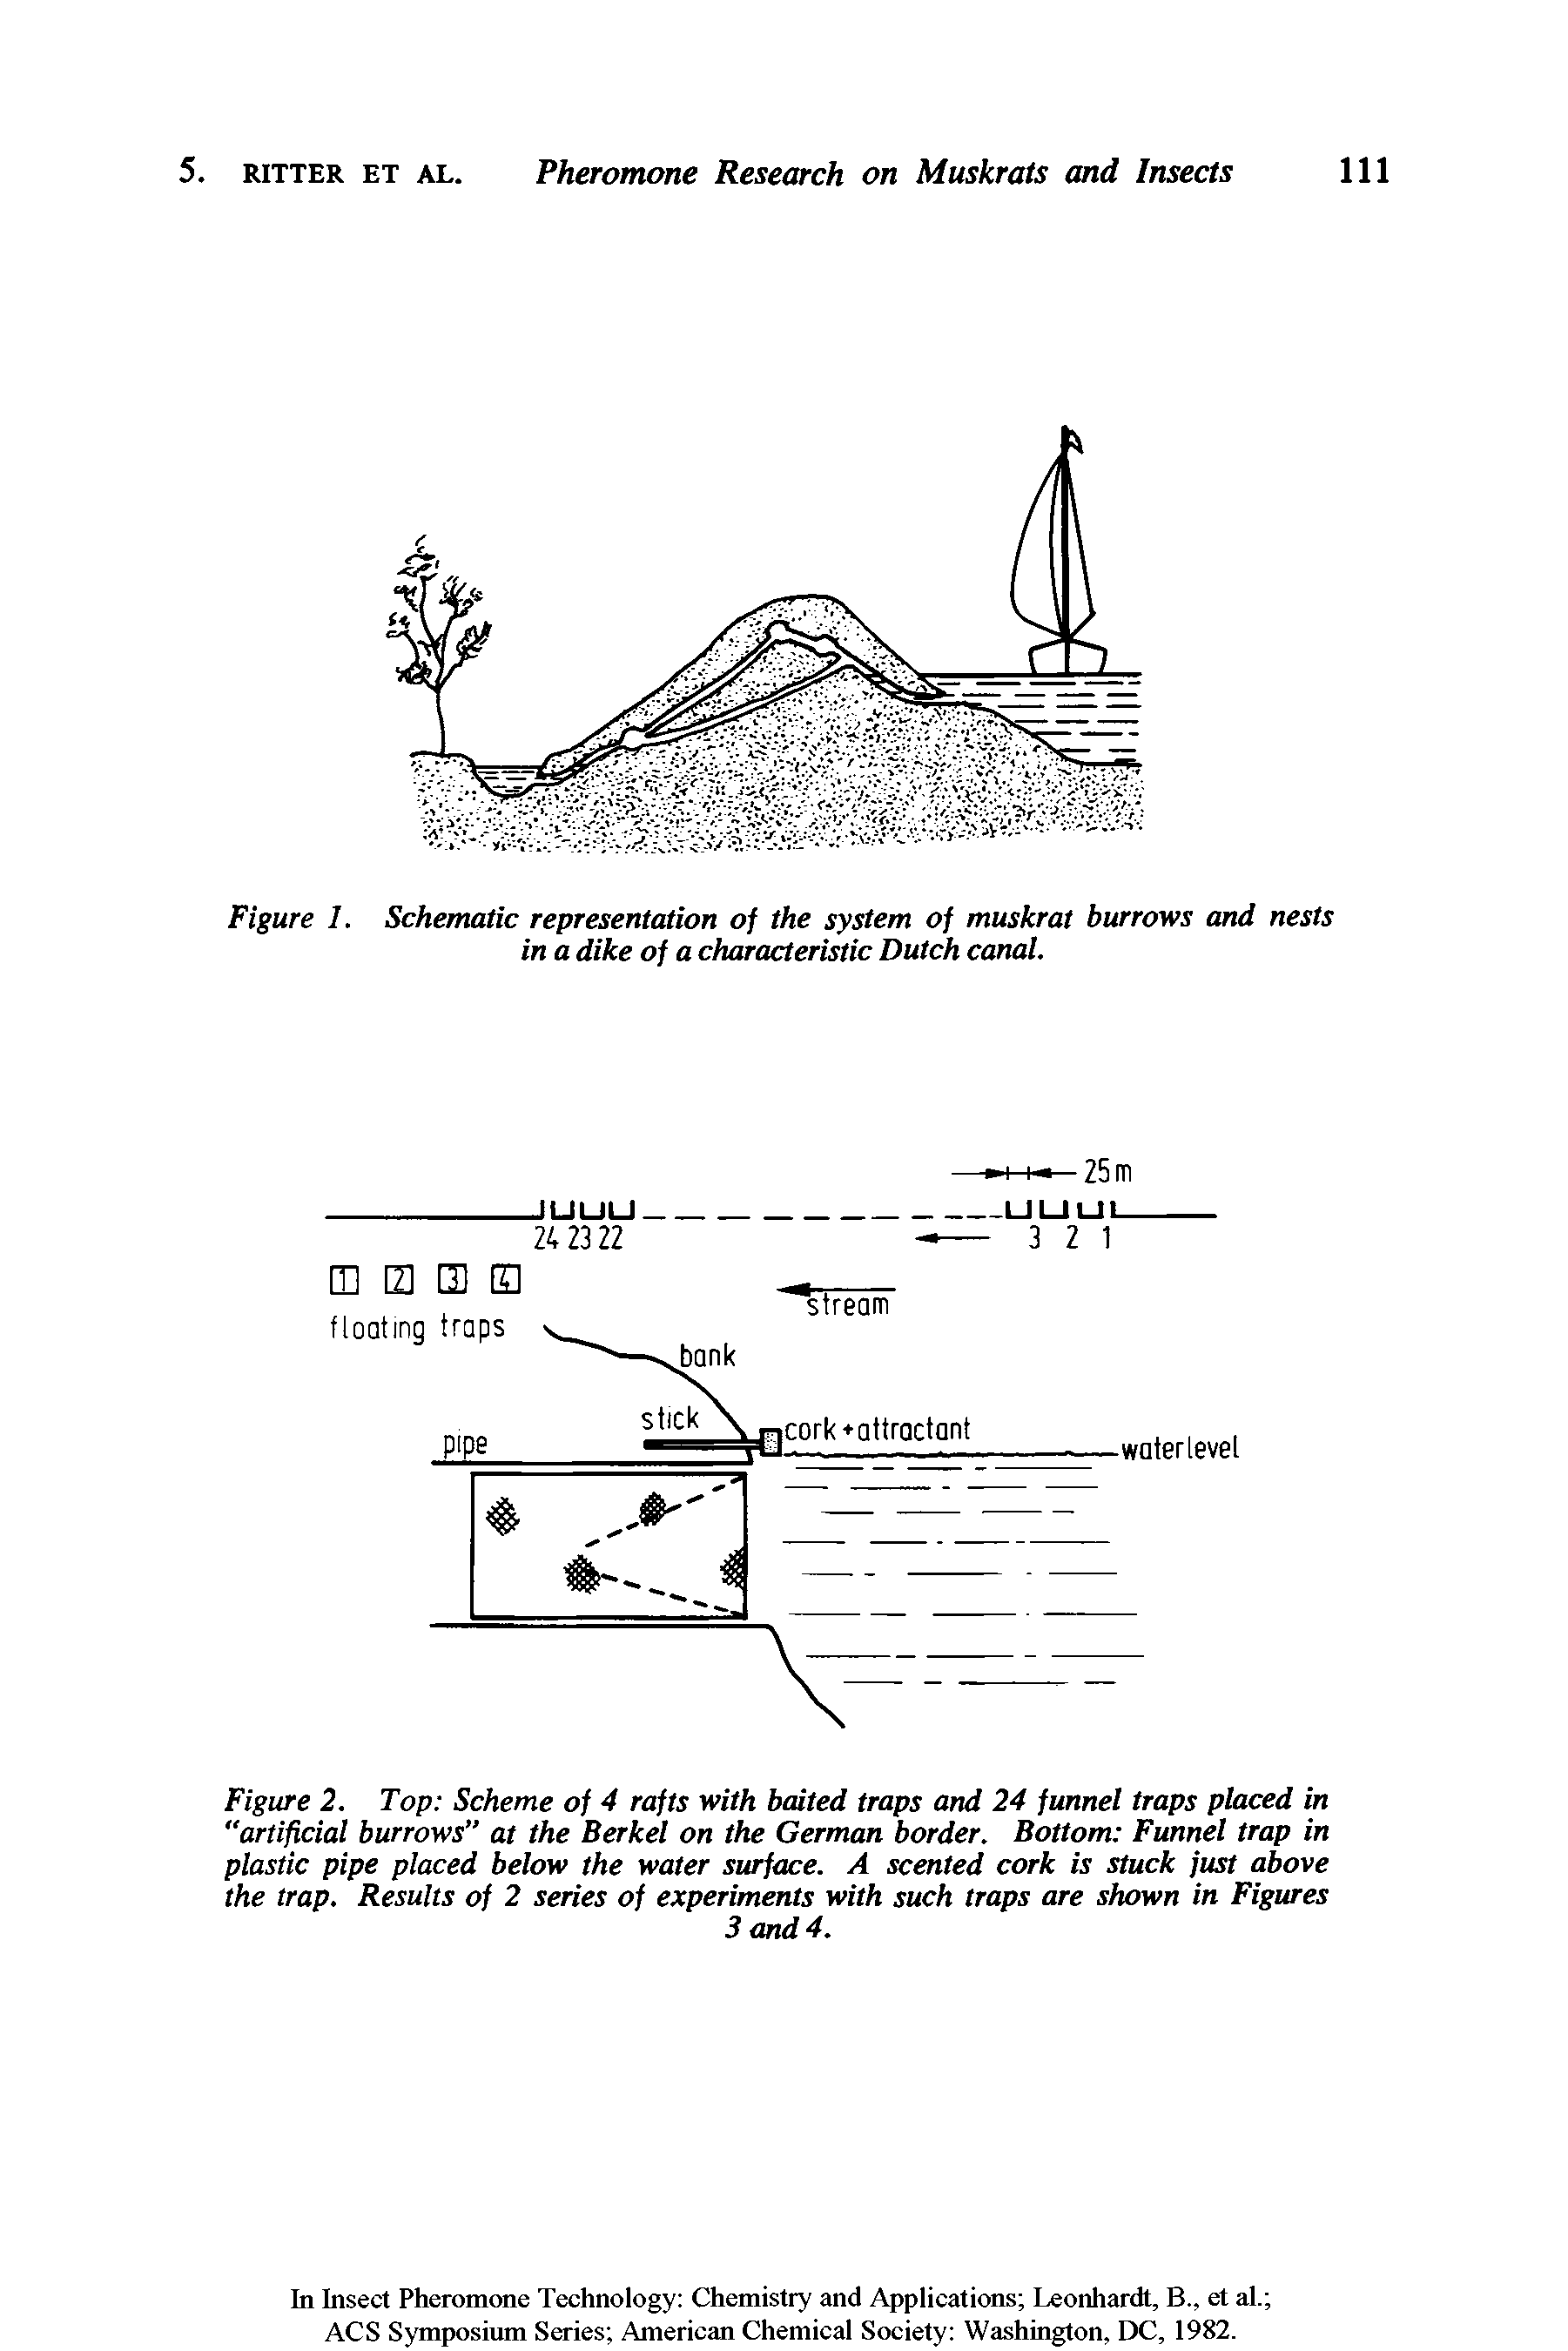 Figure 2. Top Scheme of 4 rafts with baited traps and 24 funnel traps placed in "artificial burrows at the Berkel on the German border. Bottom Funnel trap in plastic pipe placed below the water surface. A scented cork is stuck just above the trap. Results of 2 series of experiments with such traps are shown in Figures...